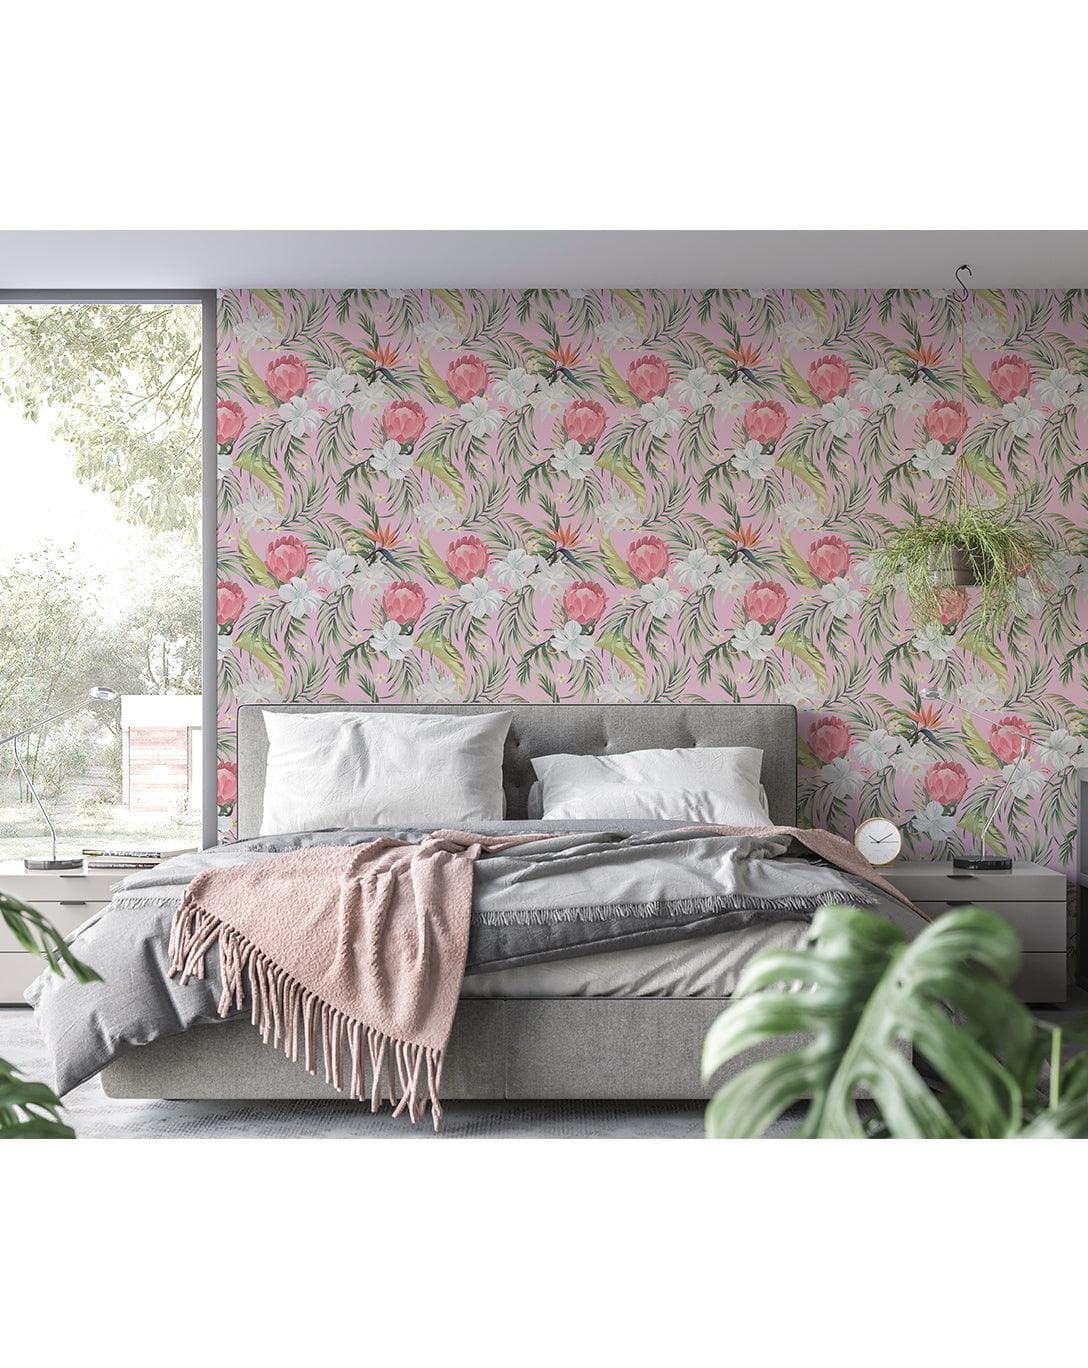 Floral Greenery Pink Flowers Removable Wallpaper Exotic Pink Flowers Botanical Removable Wallpaper Exotic Pink Flowers Botanical Removable Wallpaper 